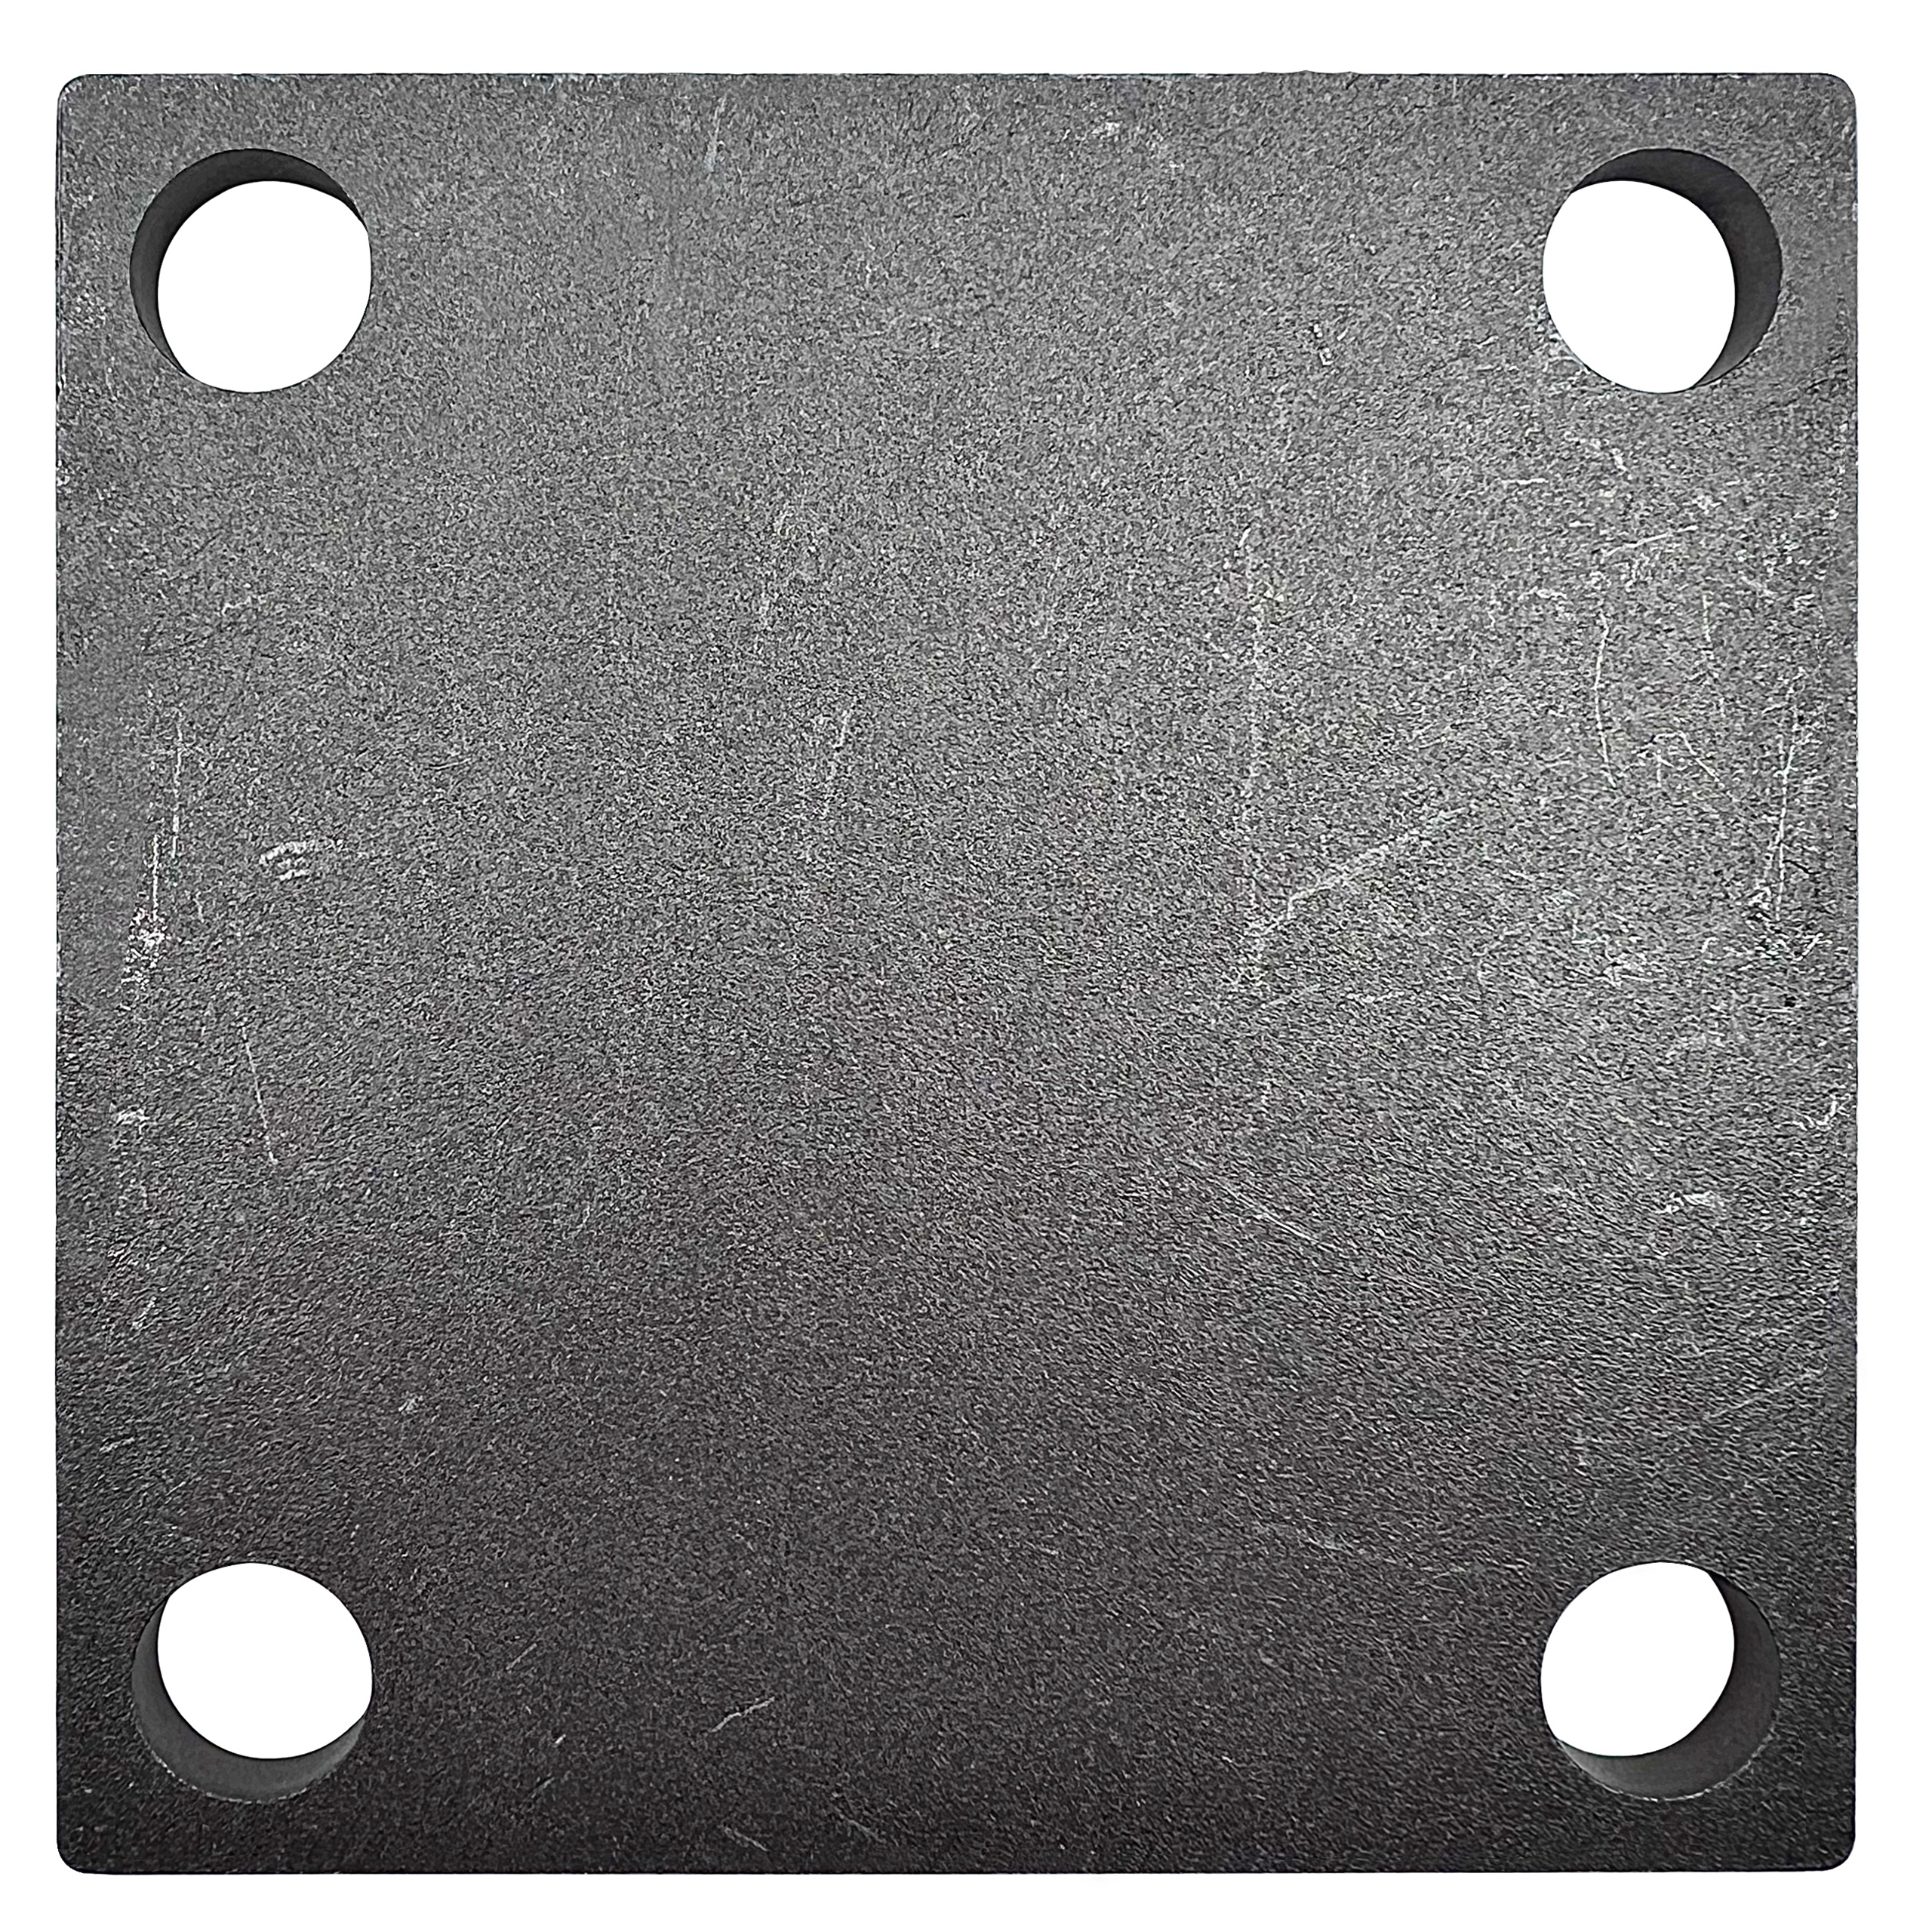 4x4 10 Pieces Weldable Square Steel Metal Baseplate 3/16 Thick 4.5mm -  Laser Cut – A36 Heavy Duty Carbon Steel